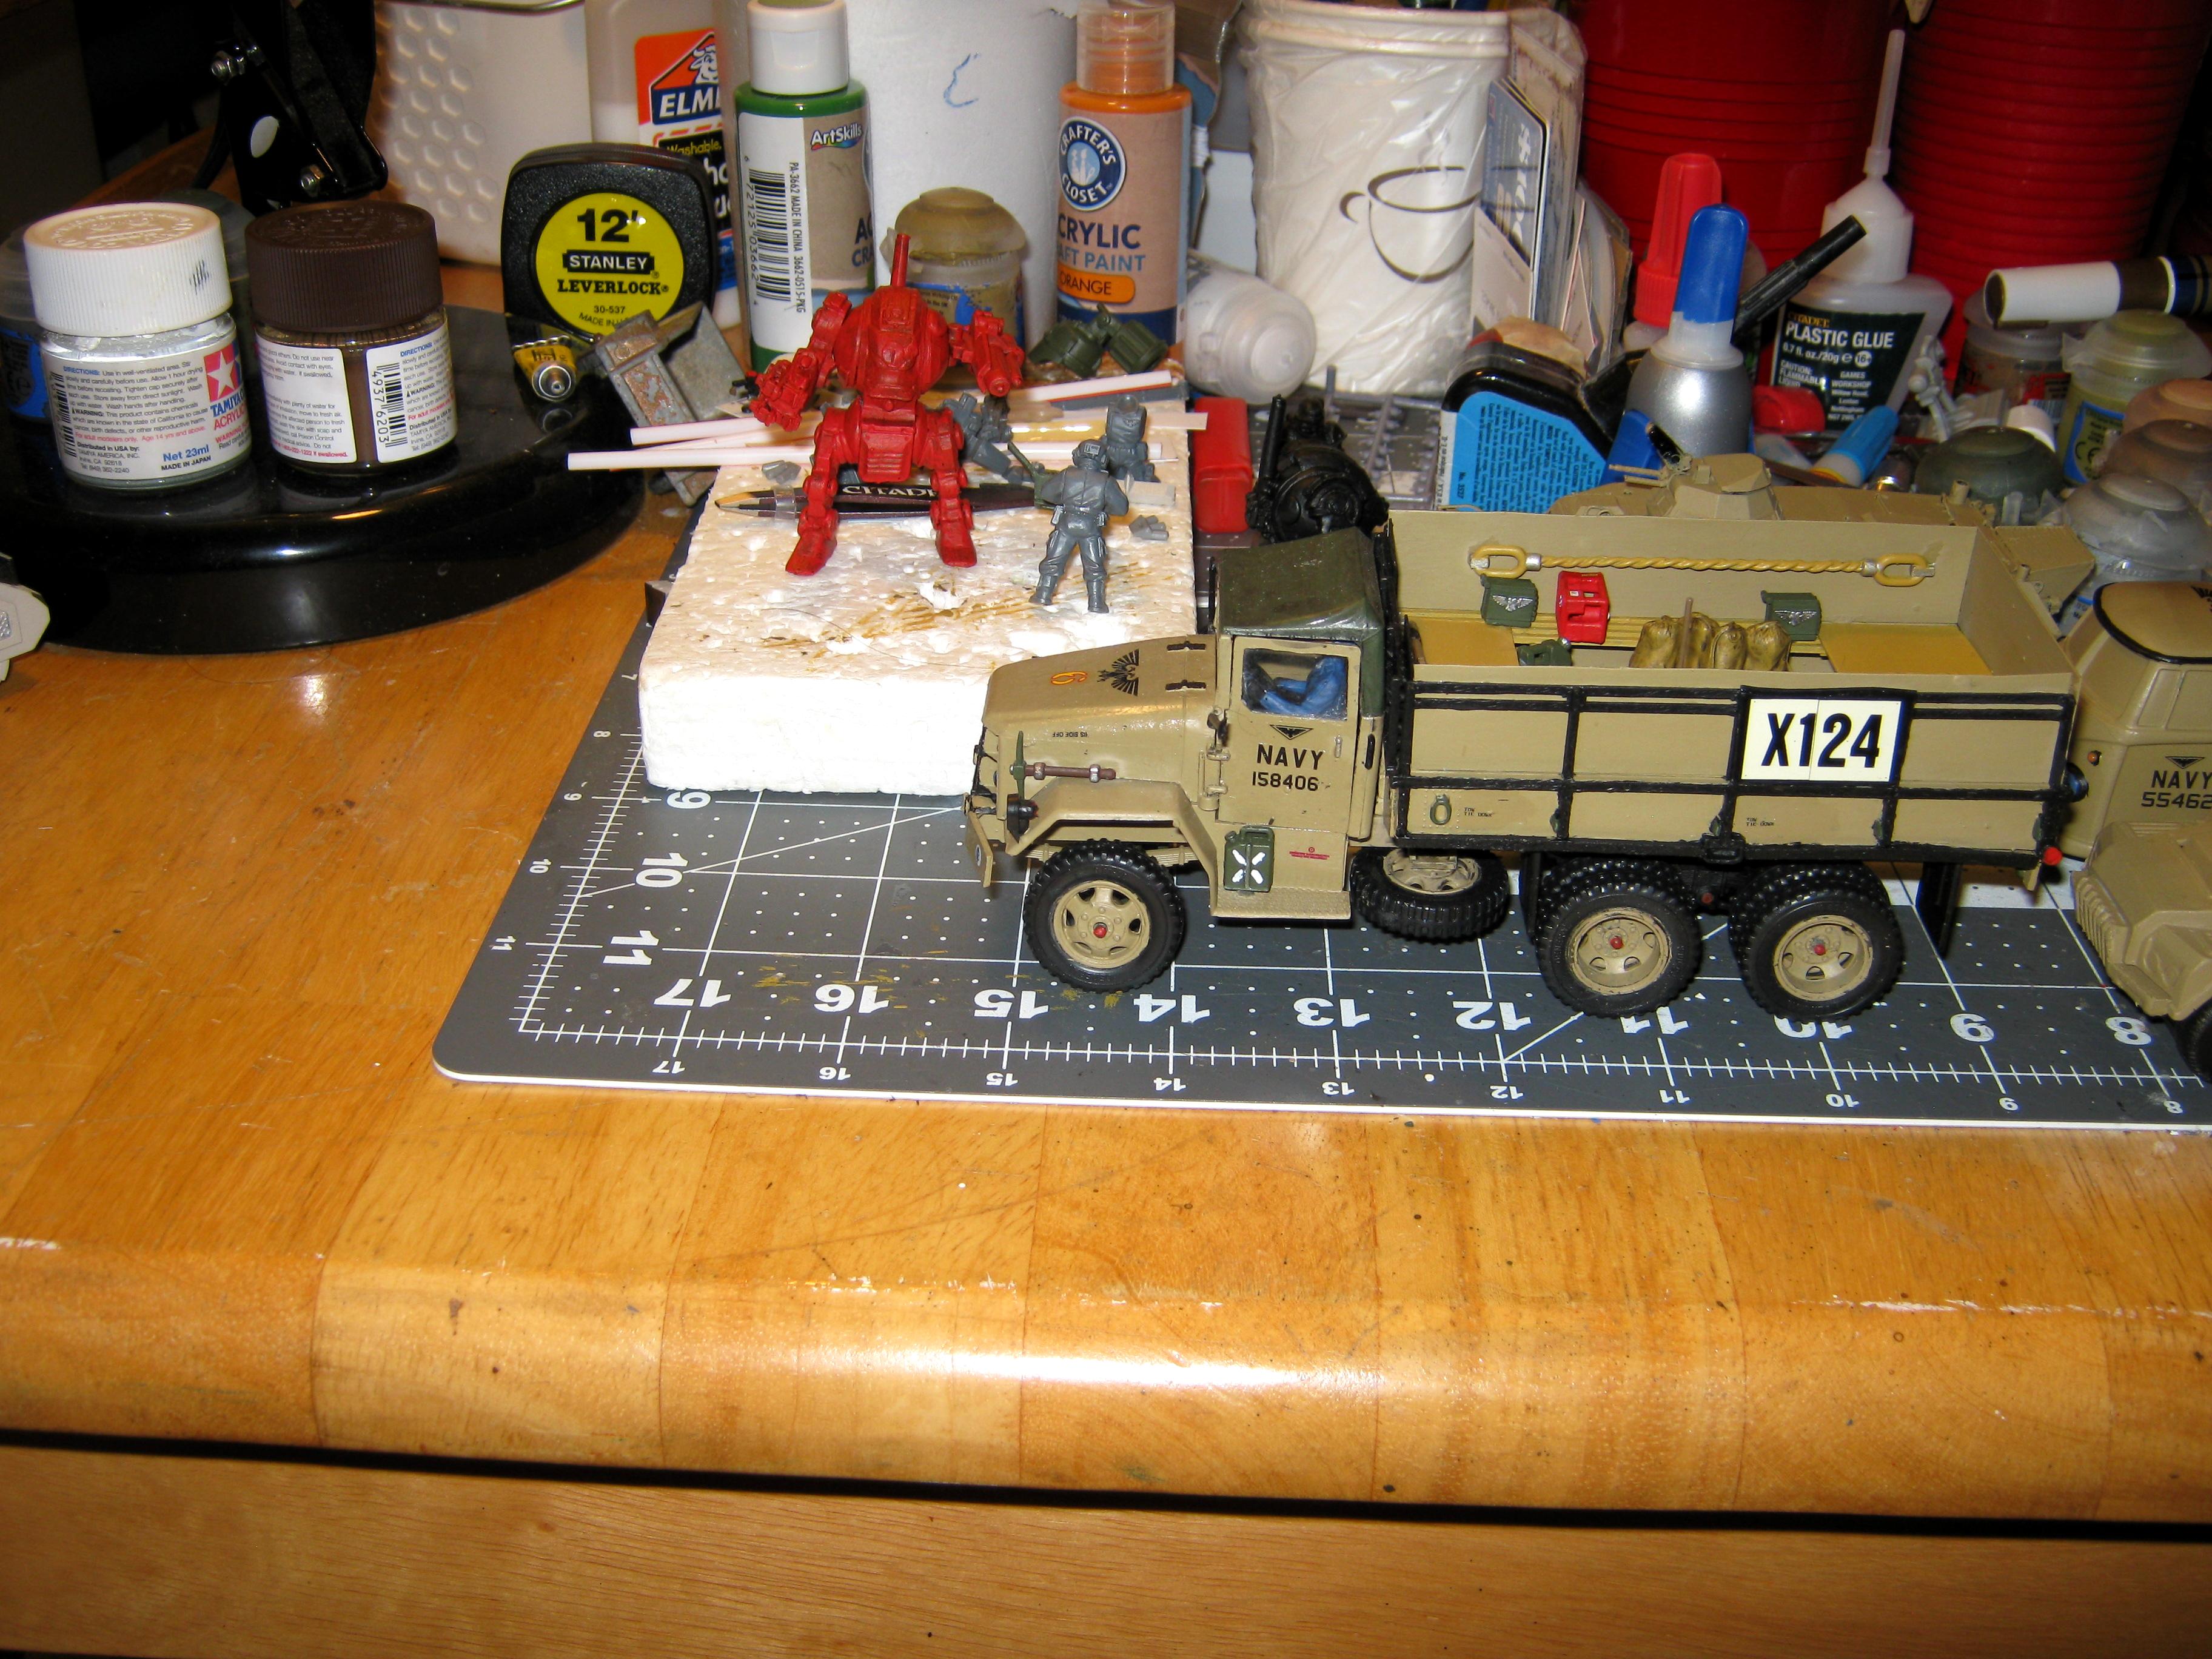 2 1/2 Ton, 6x6, Conversion, Duece And A Half, Gun Truck, Imperial, Imperial Navy, M35, Revell, Transport, Truck, U.s. Army, Vintage